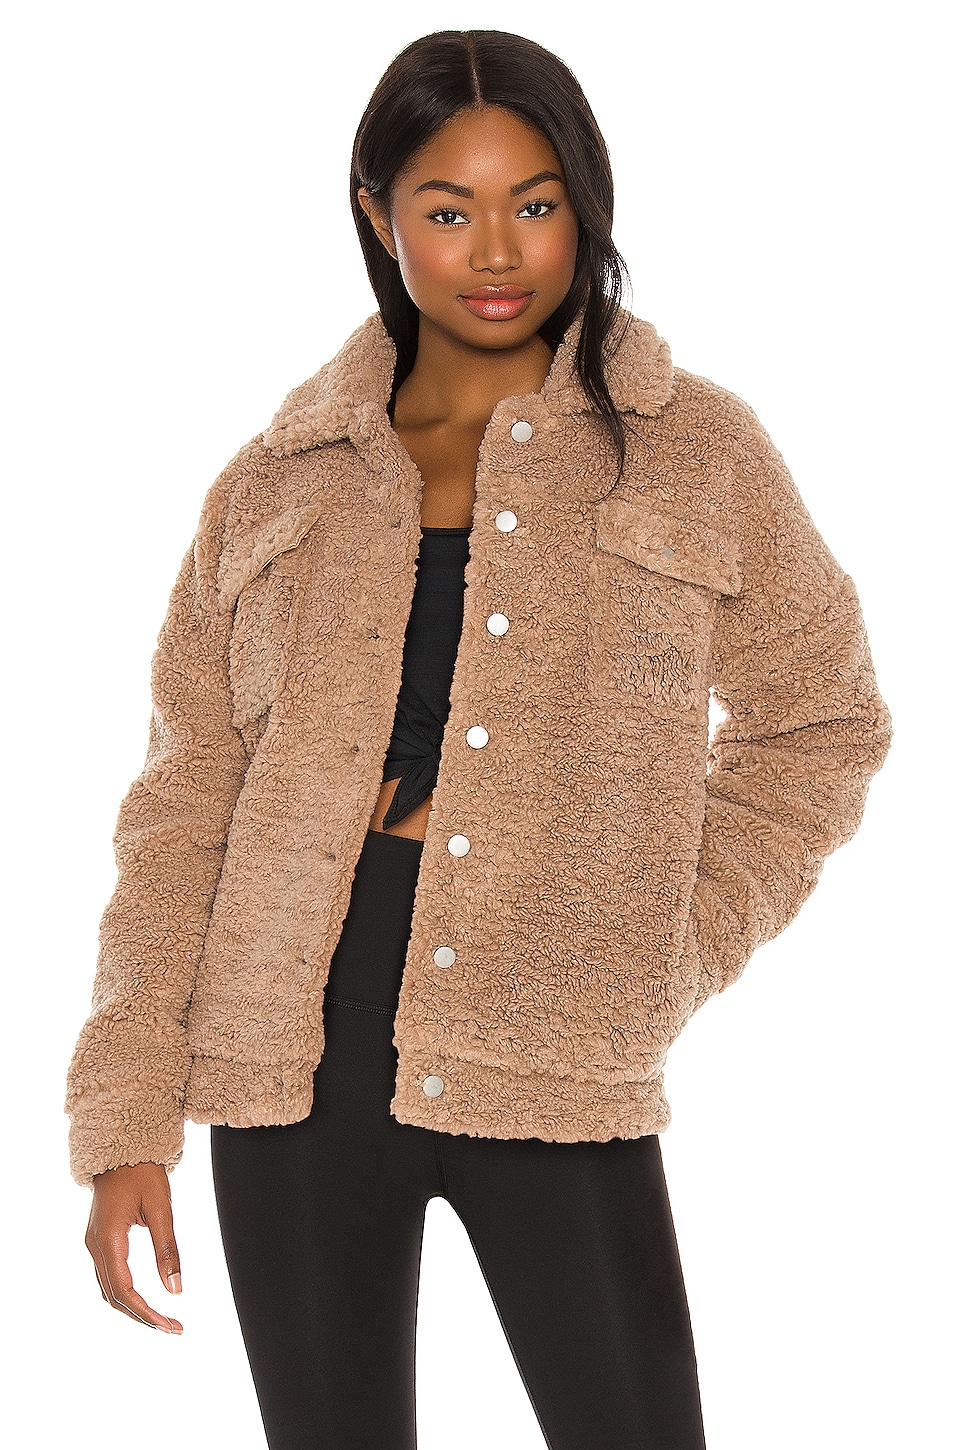 BEACH RIOT Laurie Jacket in Warm Taupe | REVOLVE